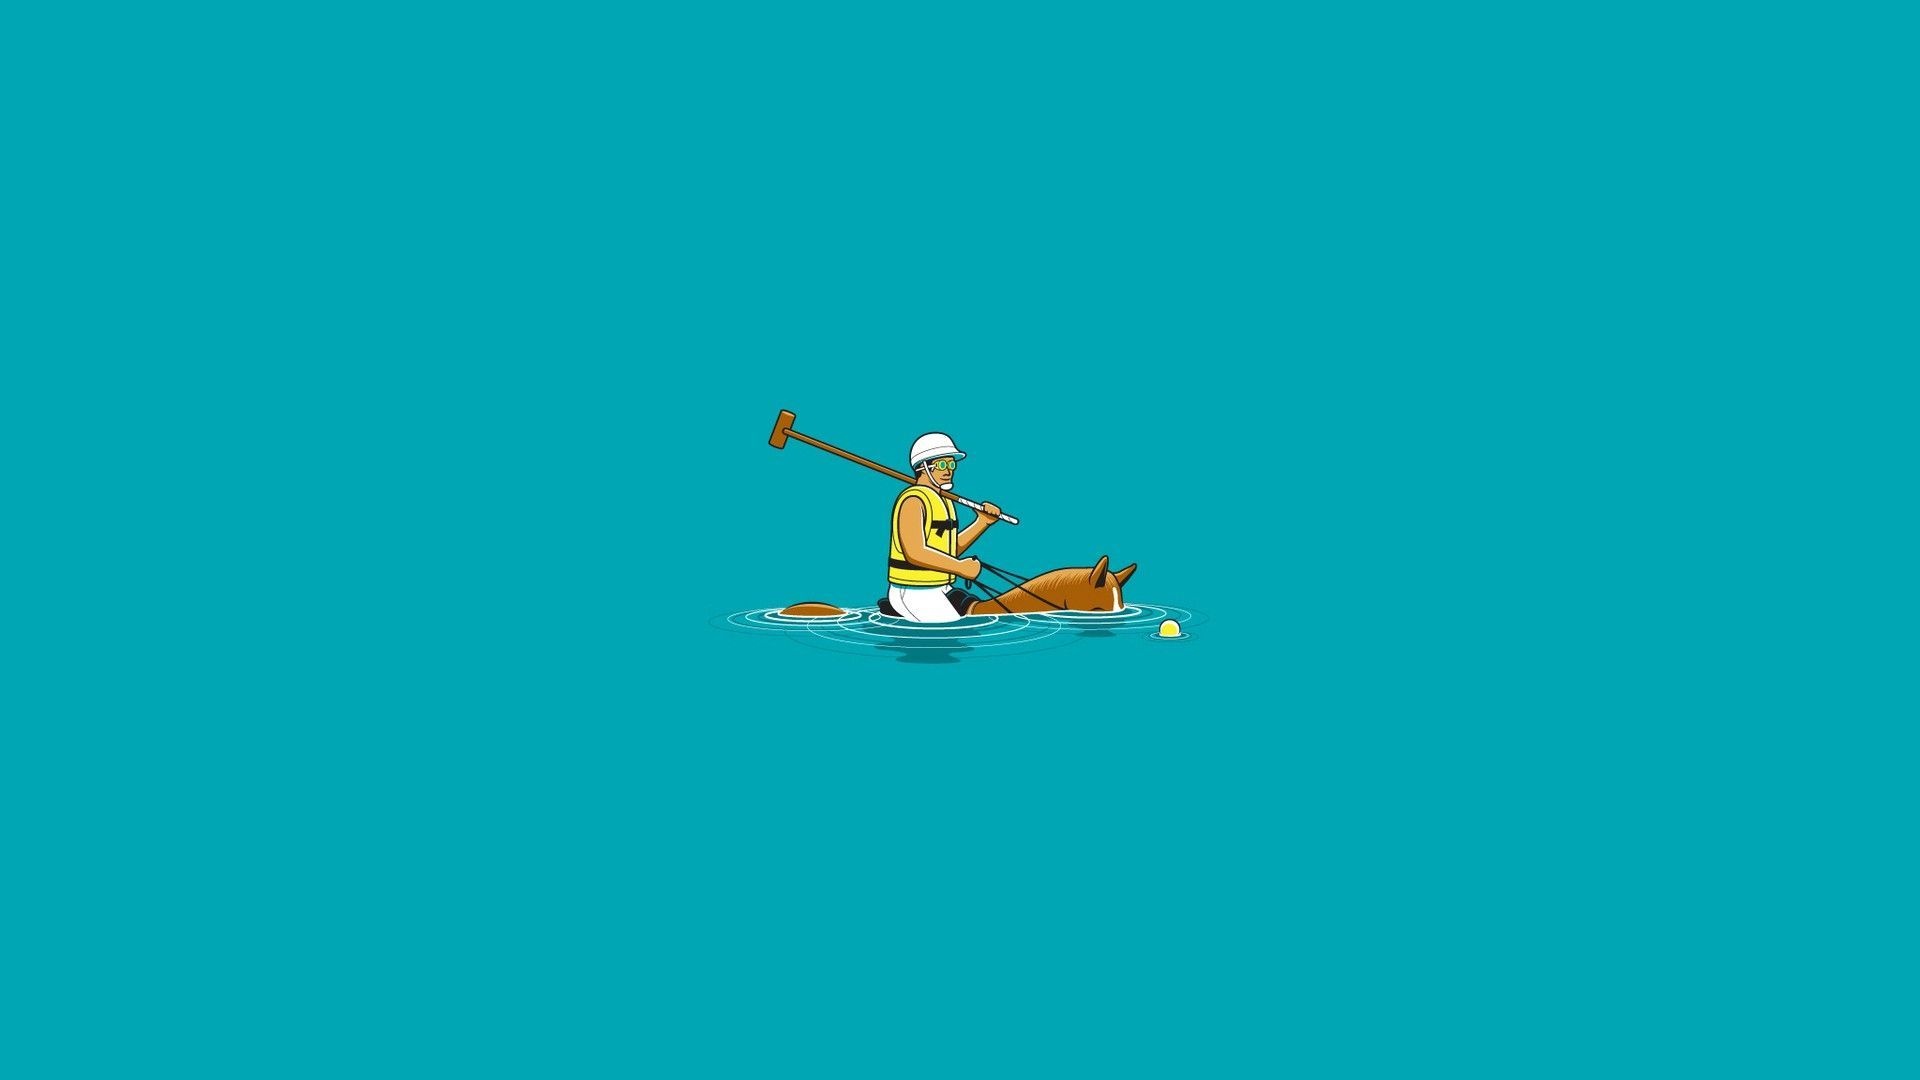 Water Polo: A poloist with his horse in the water, Satiric fan art. 1920x1080 Full HD Wallpaper.